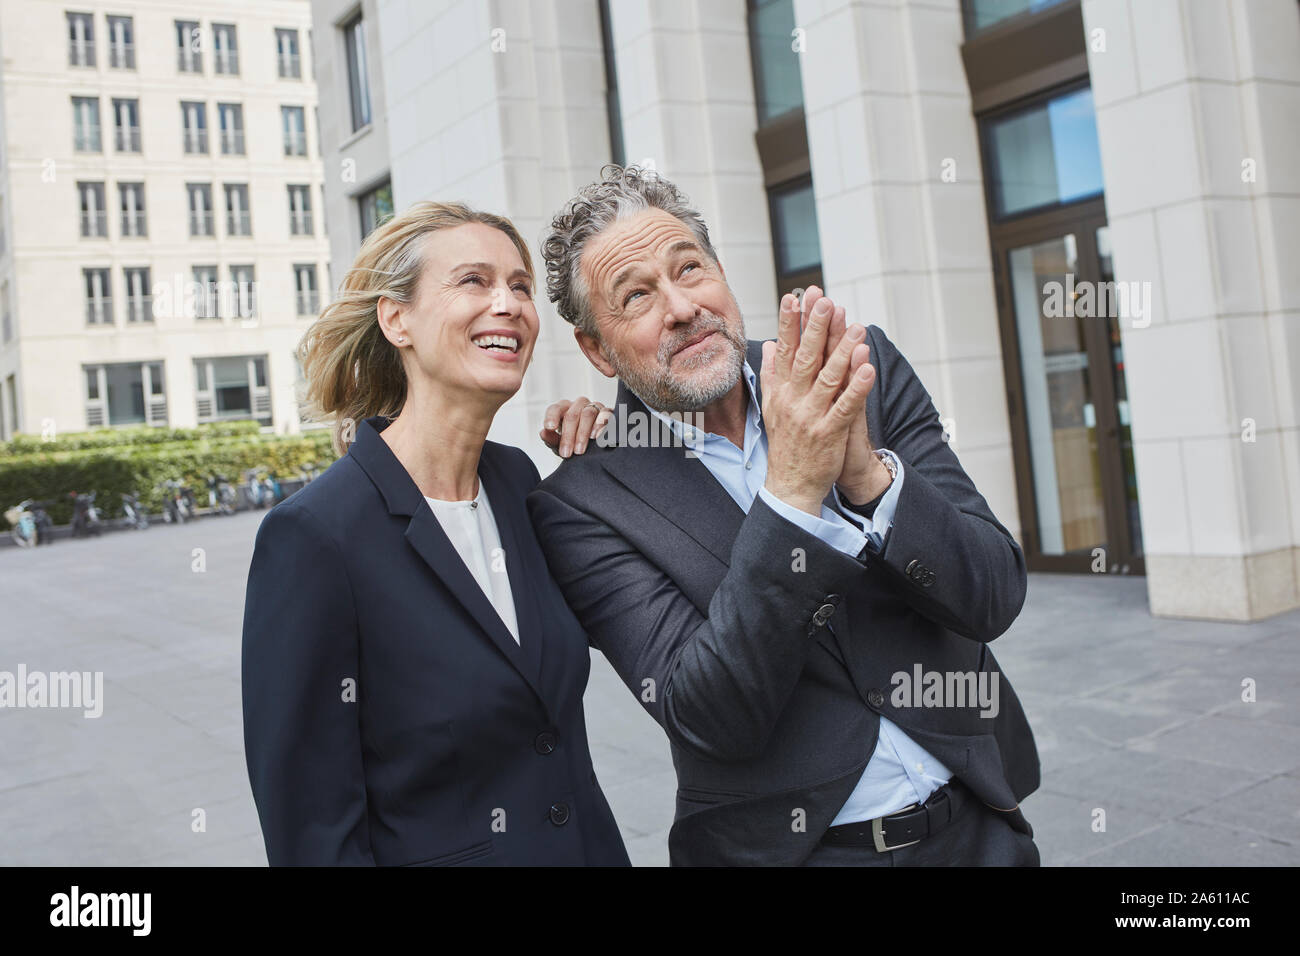 Happy businessman and businesswoman in the city looking up Stock Photo